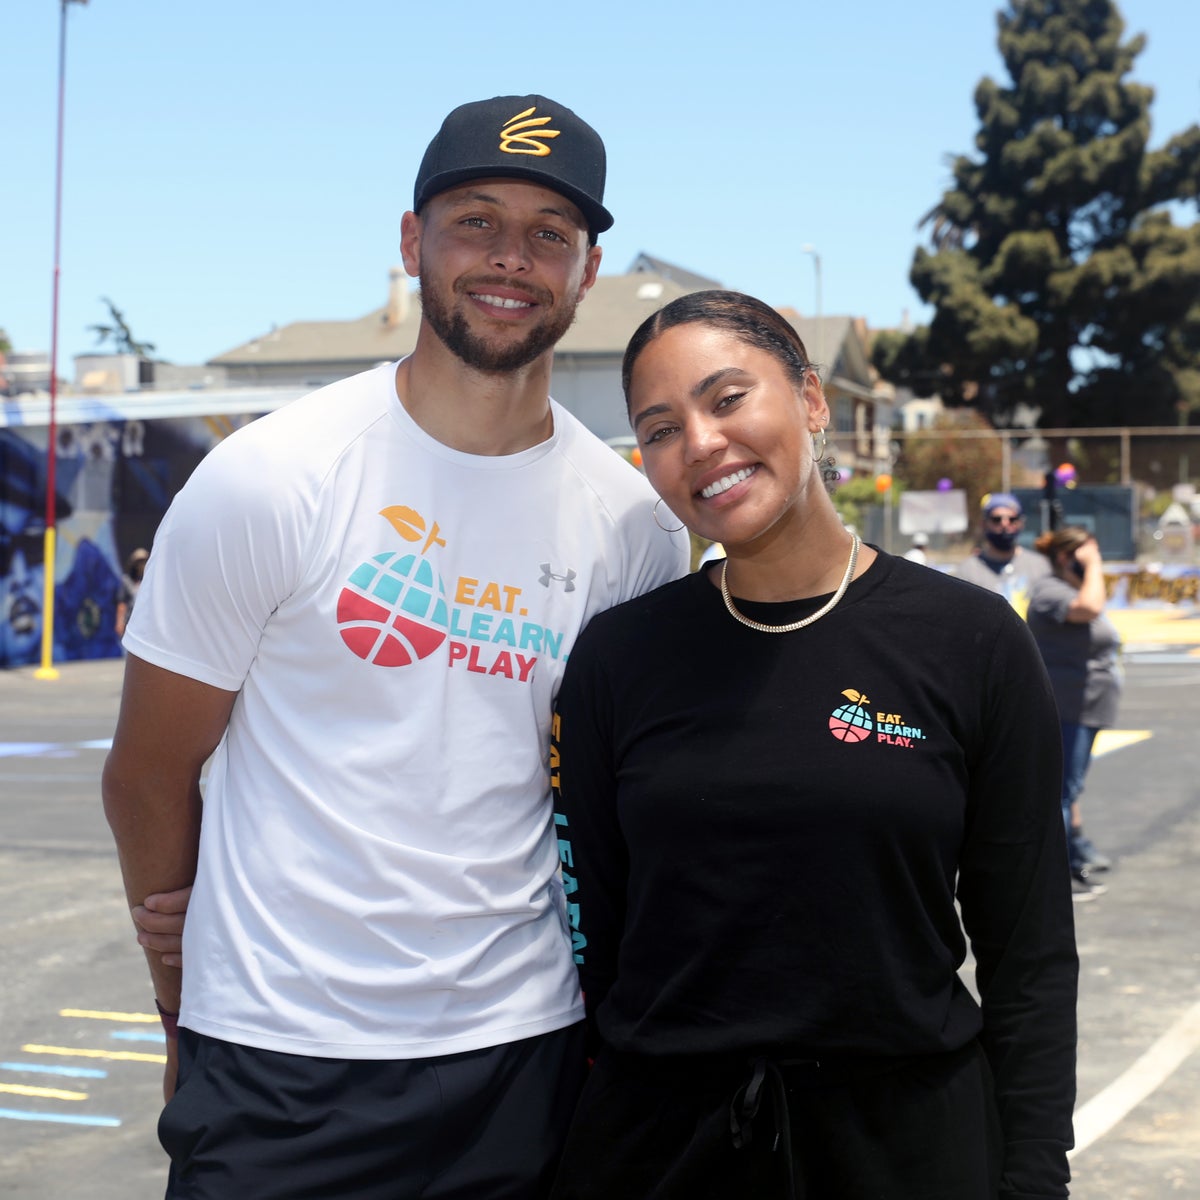 How Stephen and Ayesha Curry Make Their Enviable Marriage Work